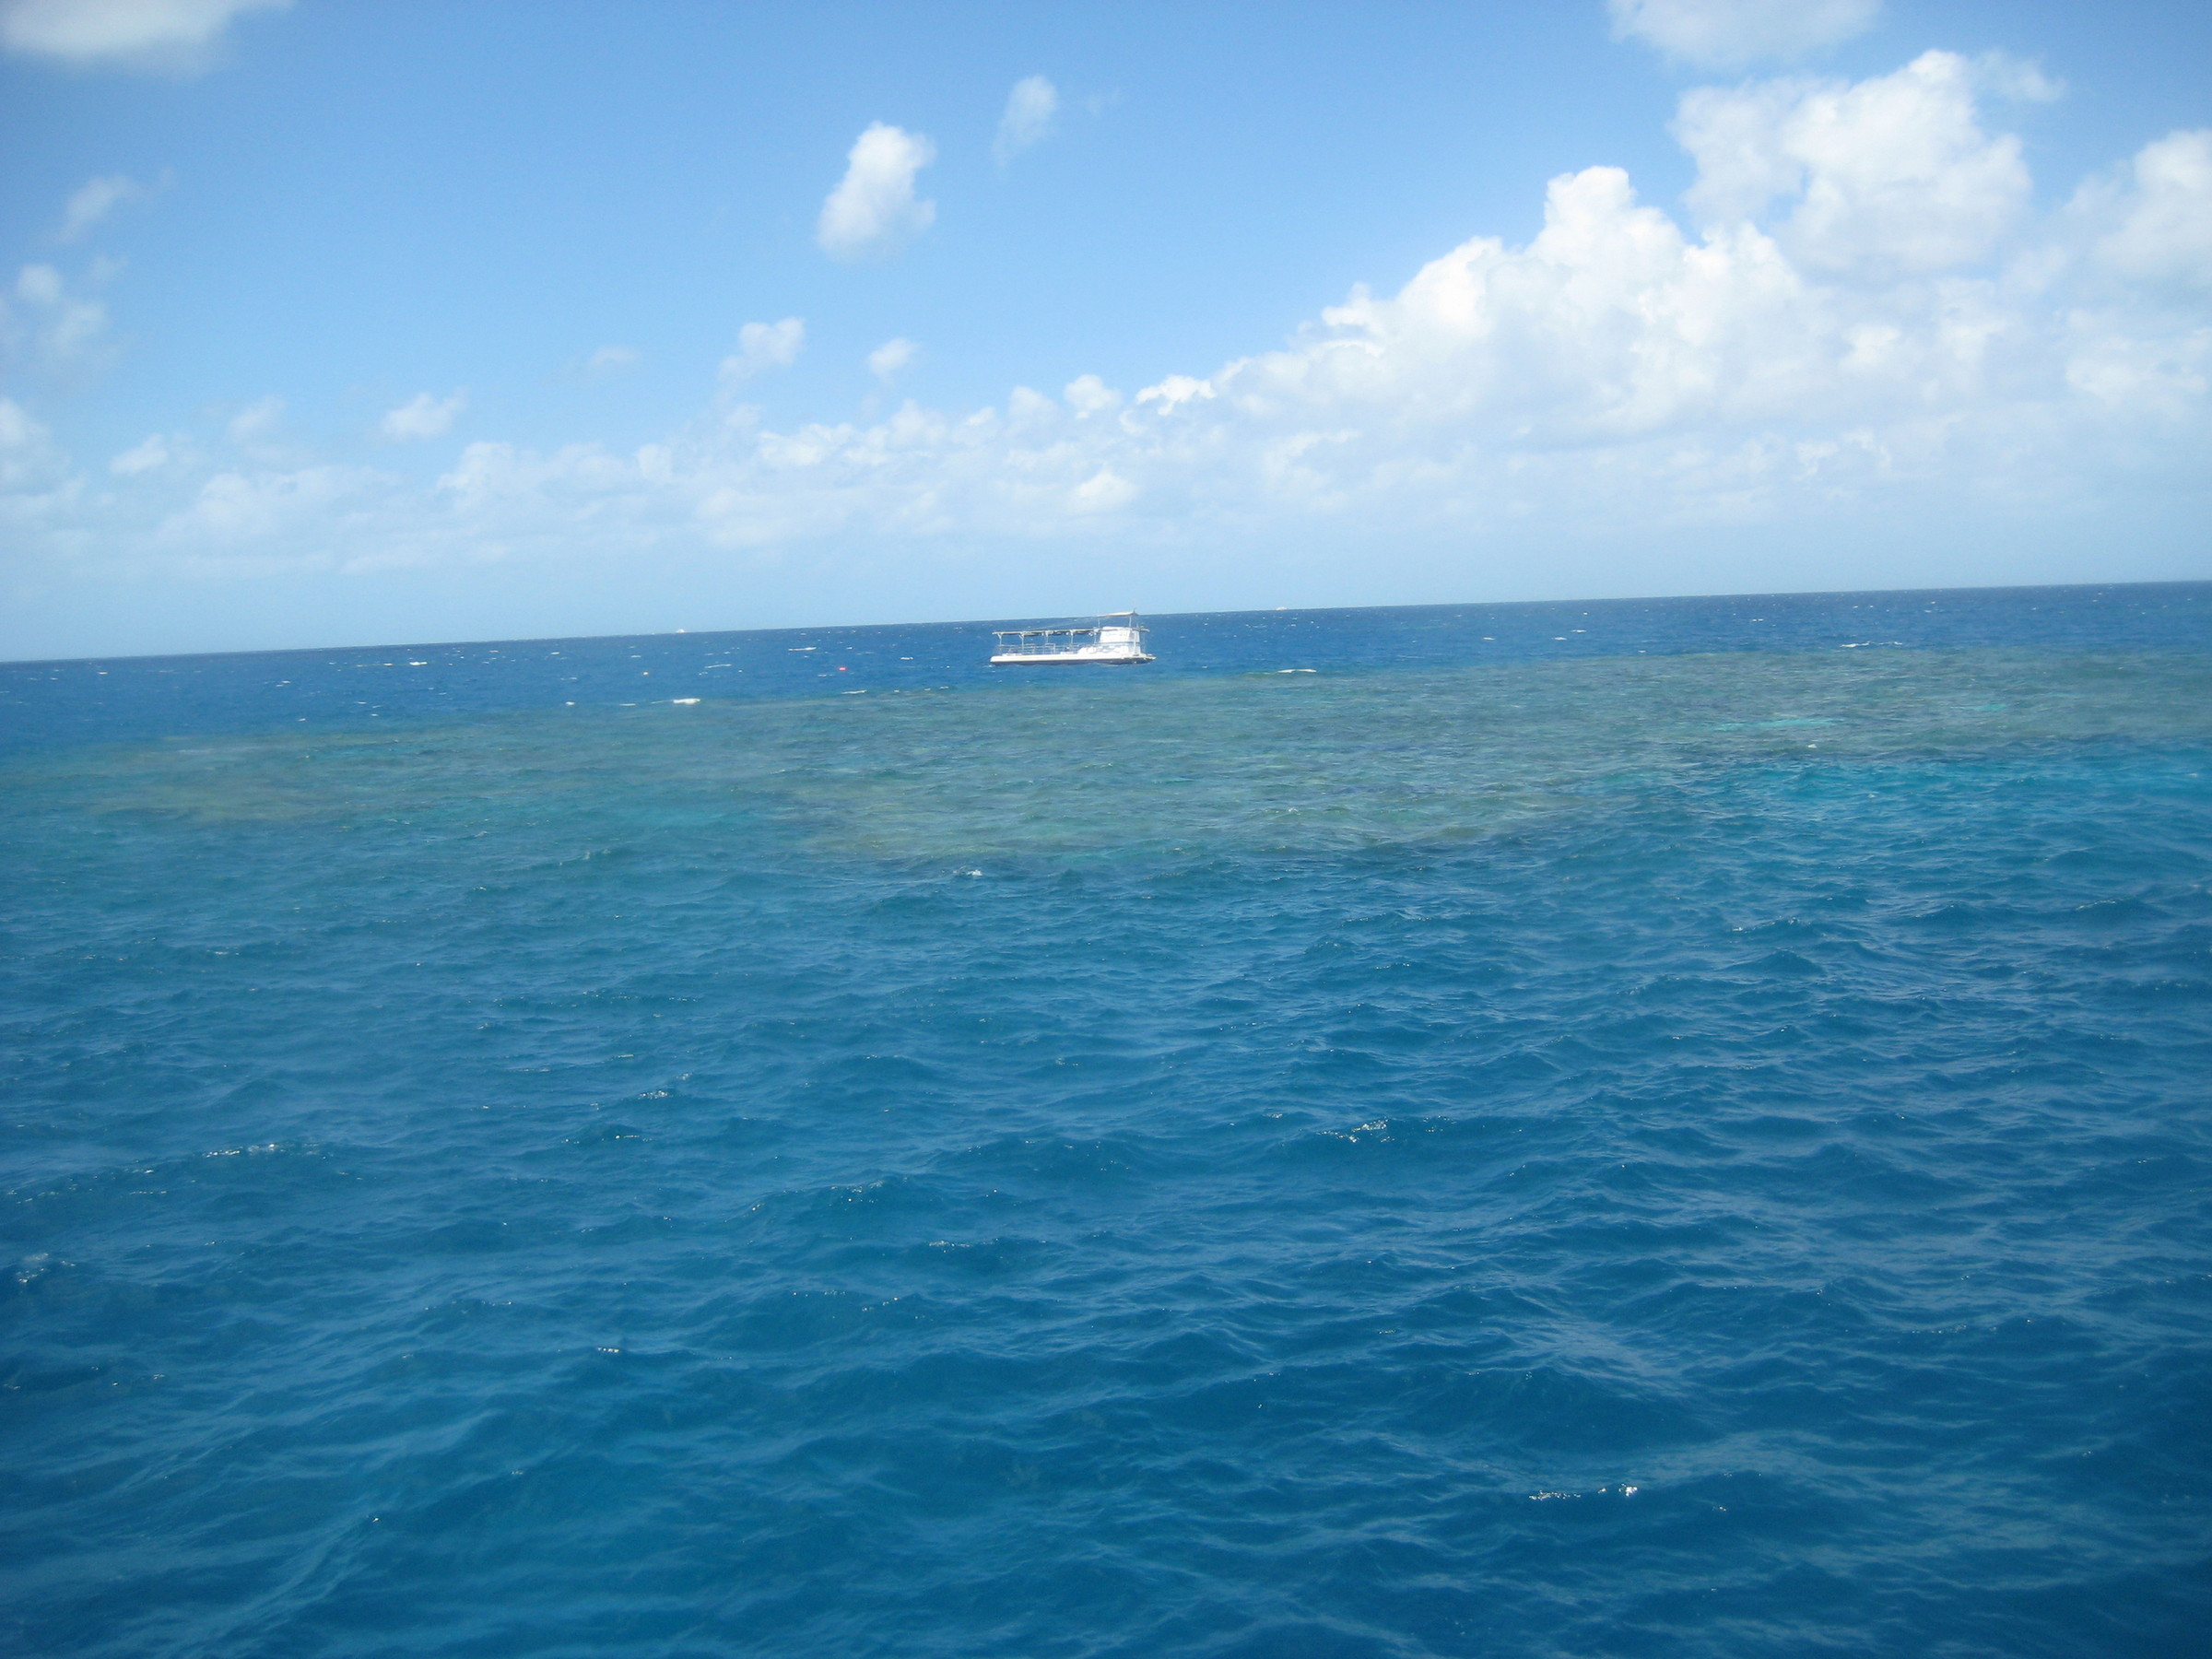 One of the glass sided boats can be seen exploring a section of the reef.